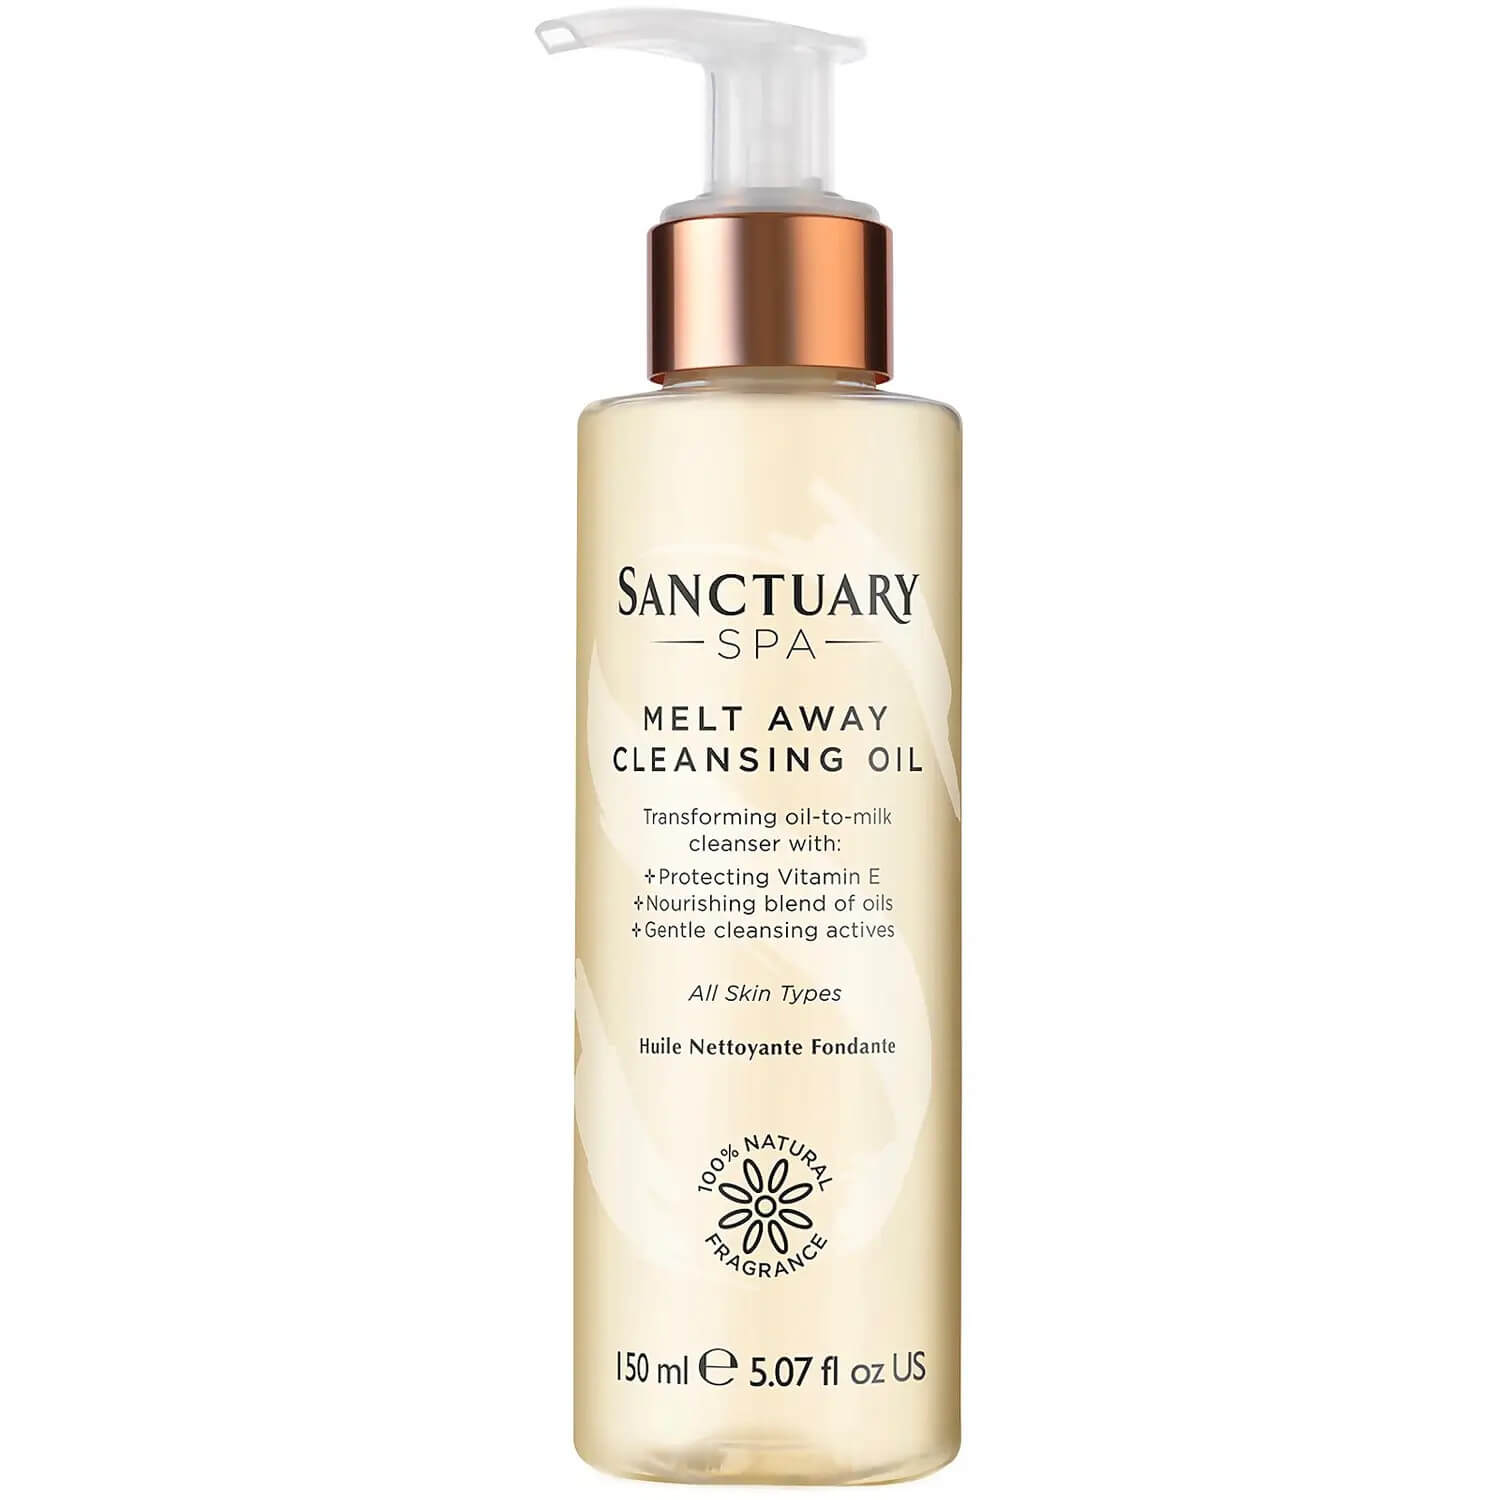 Photos - Facial / Body Cleansing Product Sanctuary Spa Melt Away Cleansing Oil 150ml 100104109